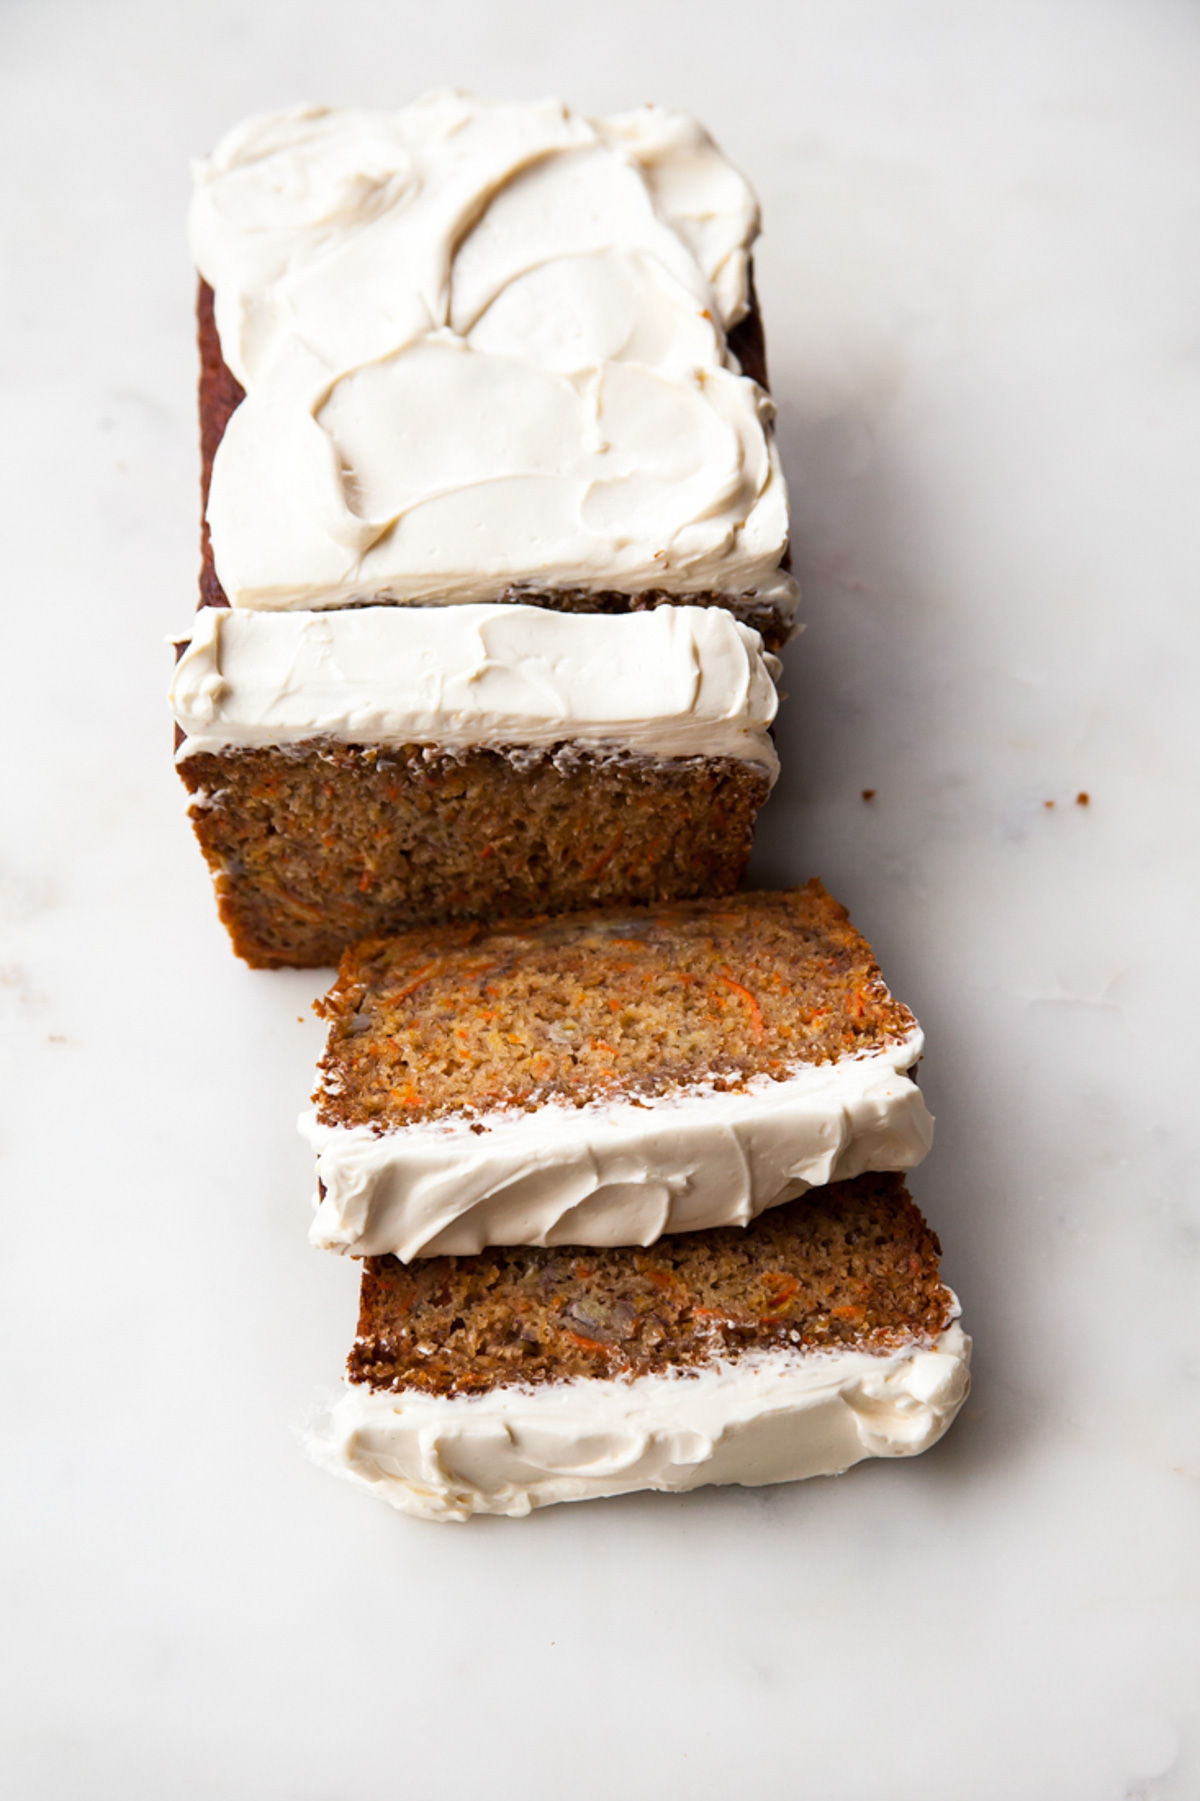 A load of carrot banana bread with cream cheese frosting that's been sliced